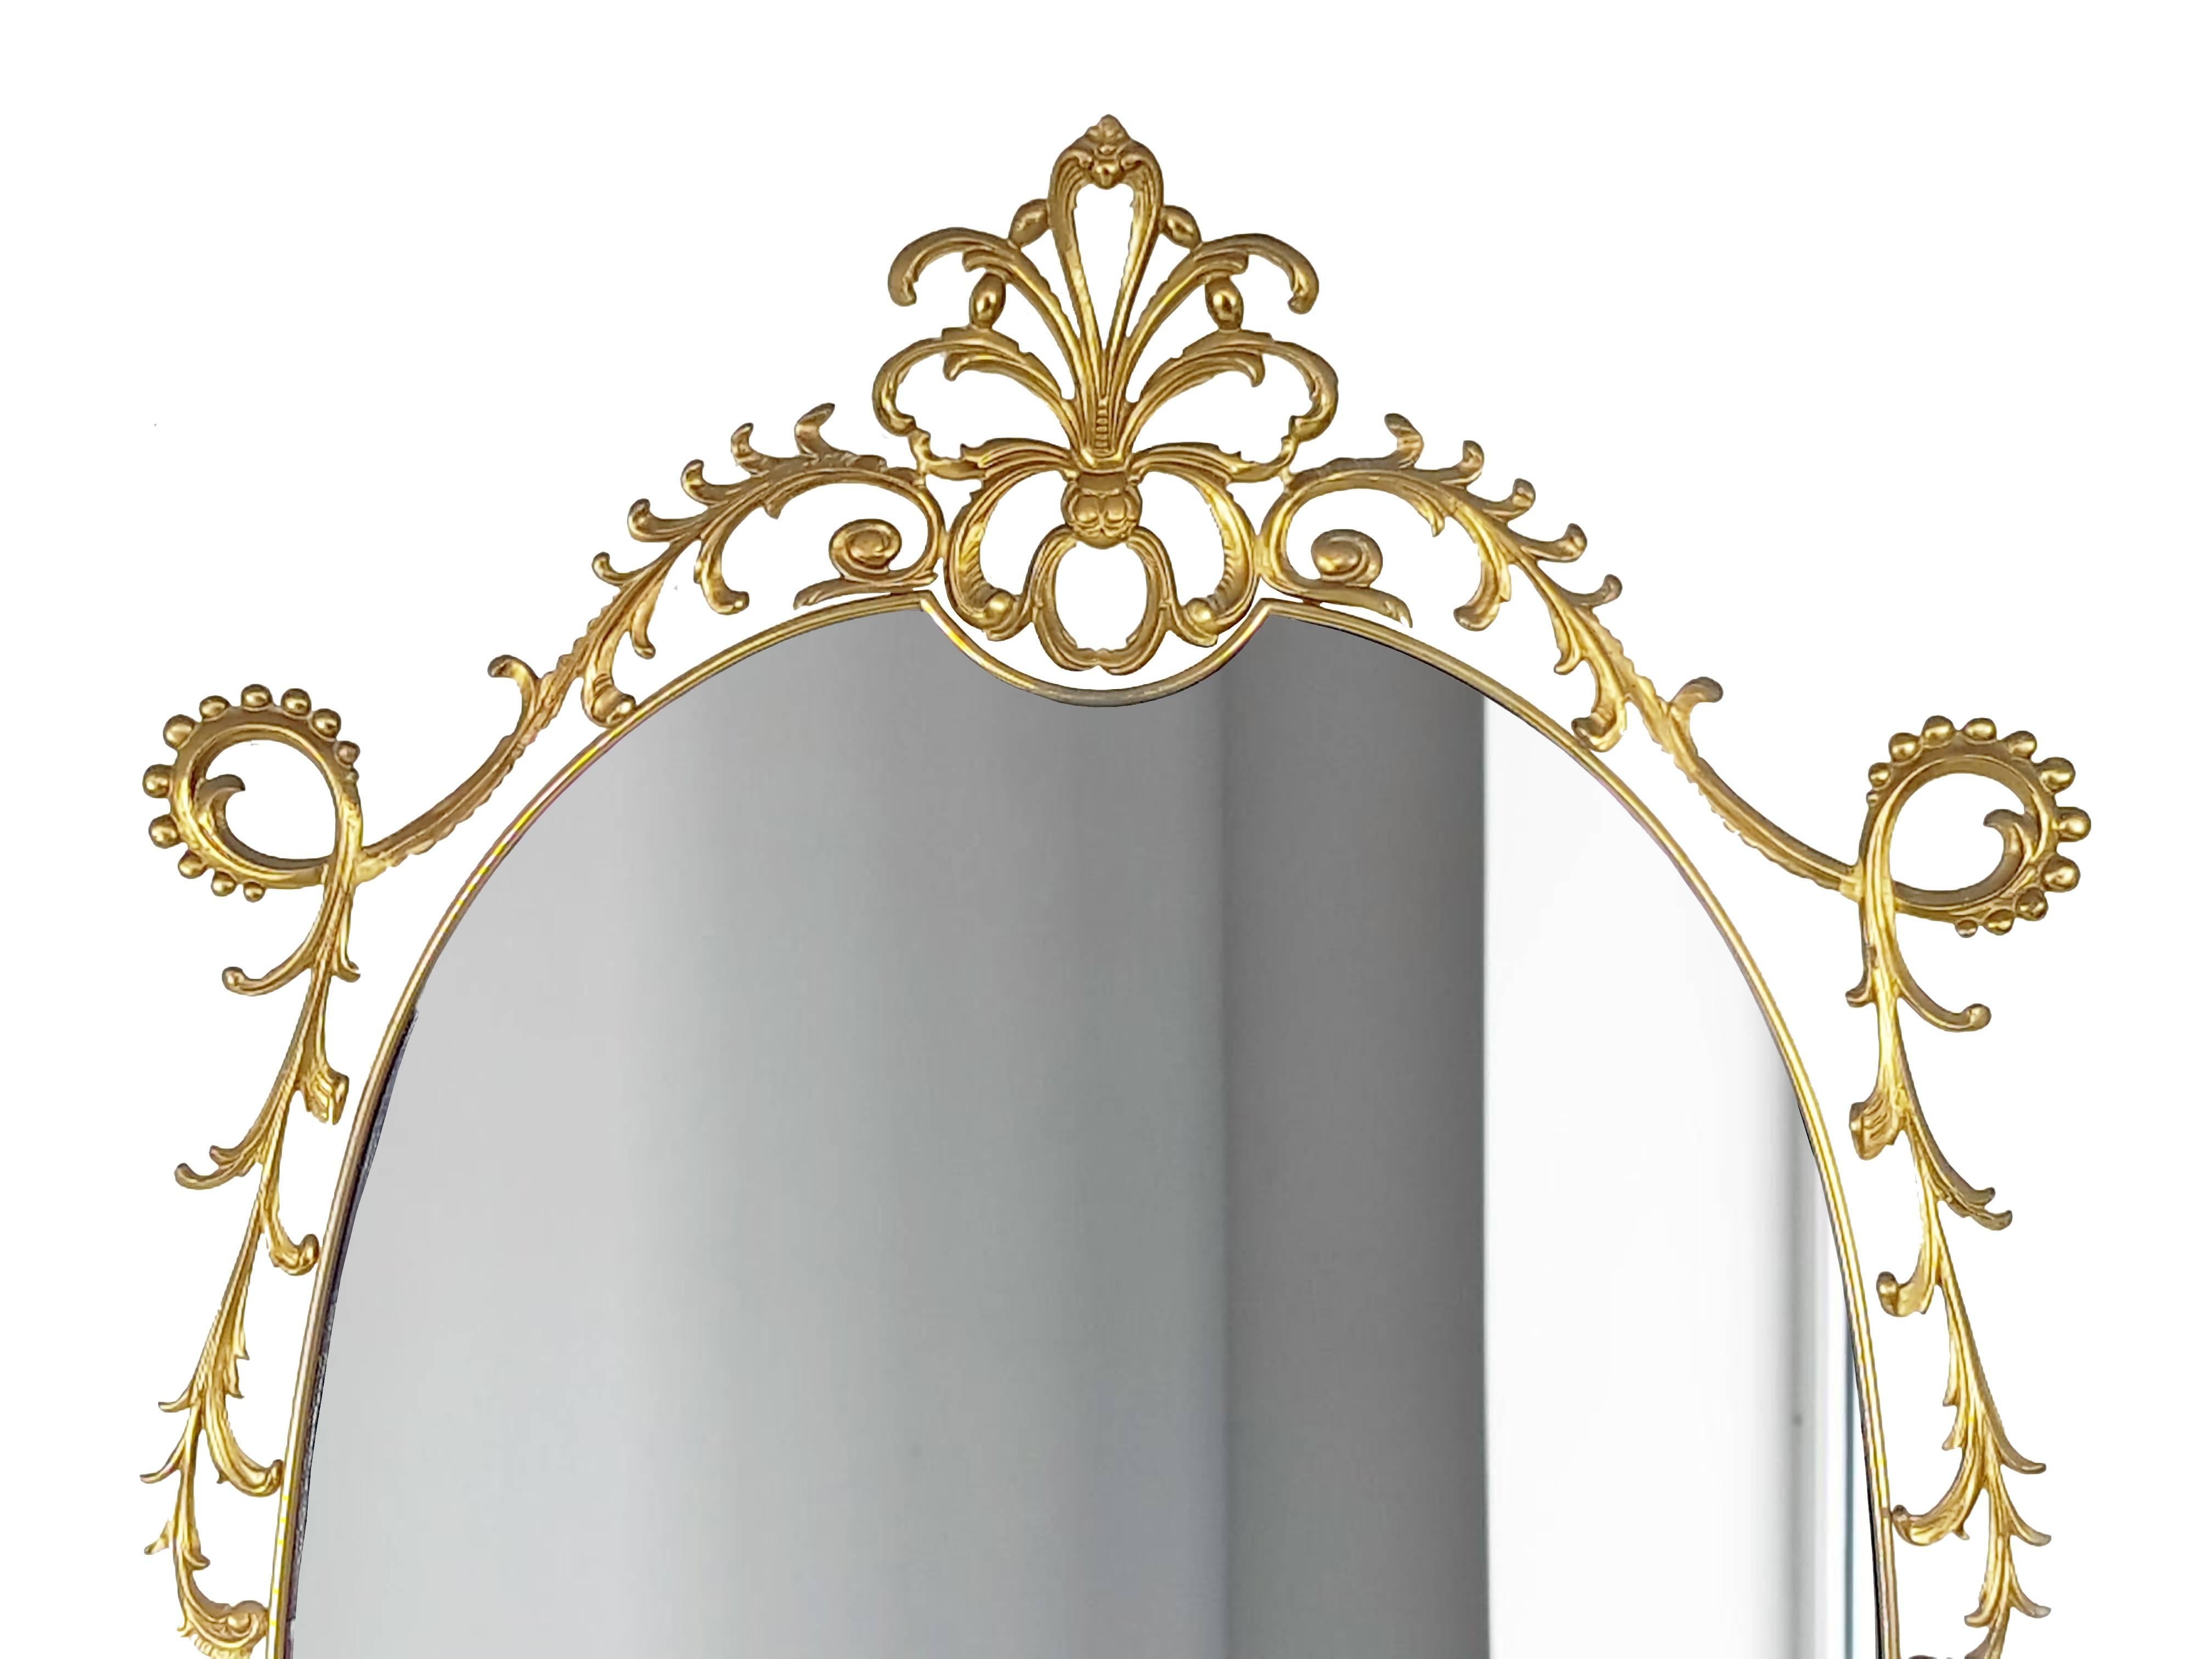 This Italian wall mirror was made from a brass frame with a mirrored and colored blue glass in decorative Art Nouveau, Rocaille style. It remains in very good condition: oxidation spots consistent with age.